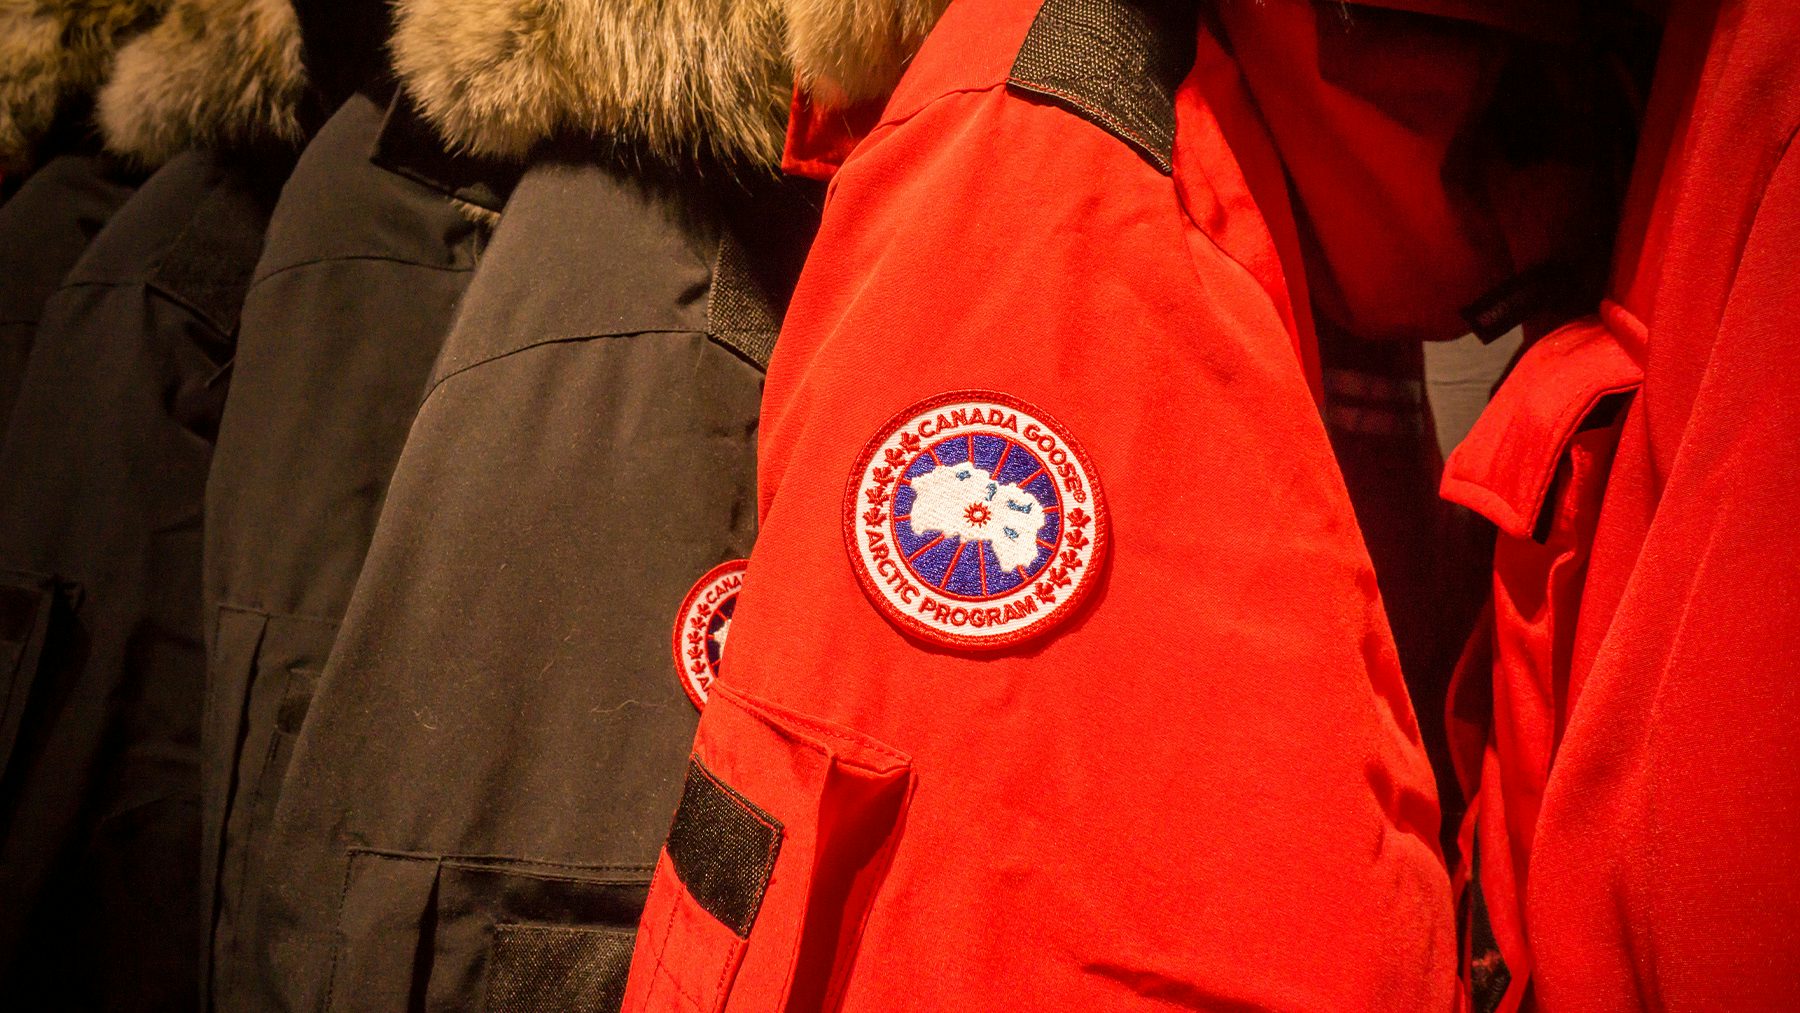 Canada Goose Holdings was fined by China and criticised by its state media for allegedly misleading consumers in some advertisements. Shutterstock.